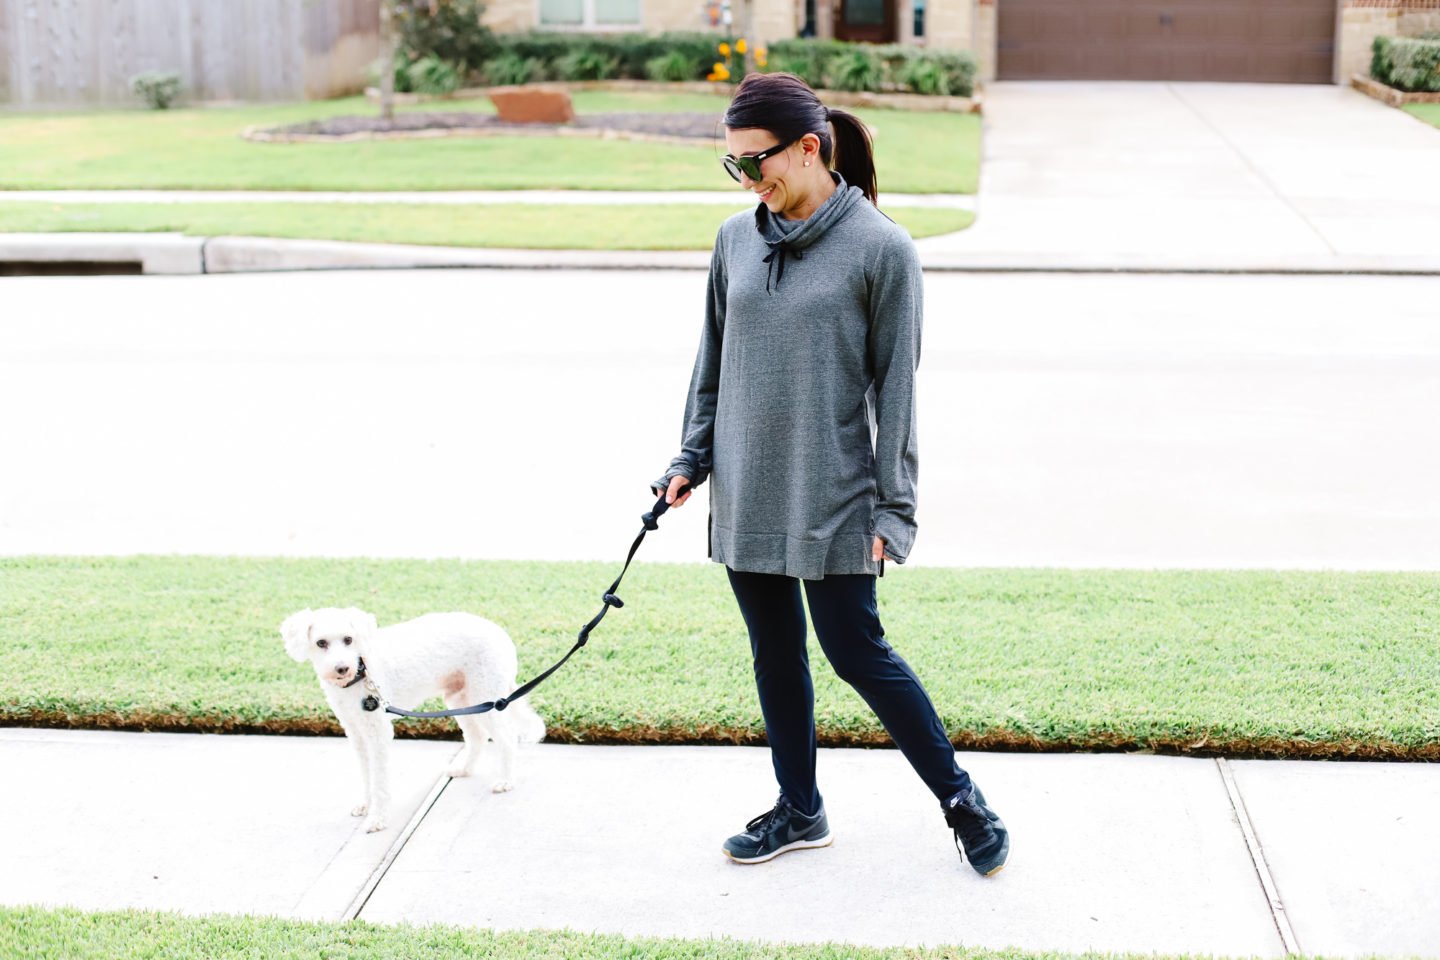 What to Wear with Leggings This Fall: 5 Outfit Ideas - Seven Graces